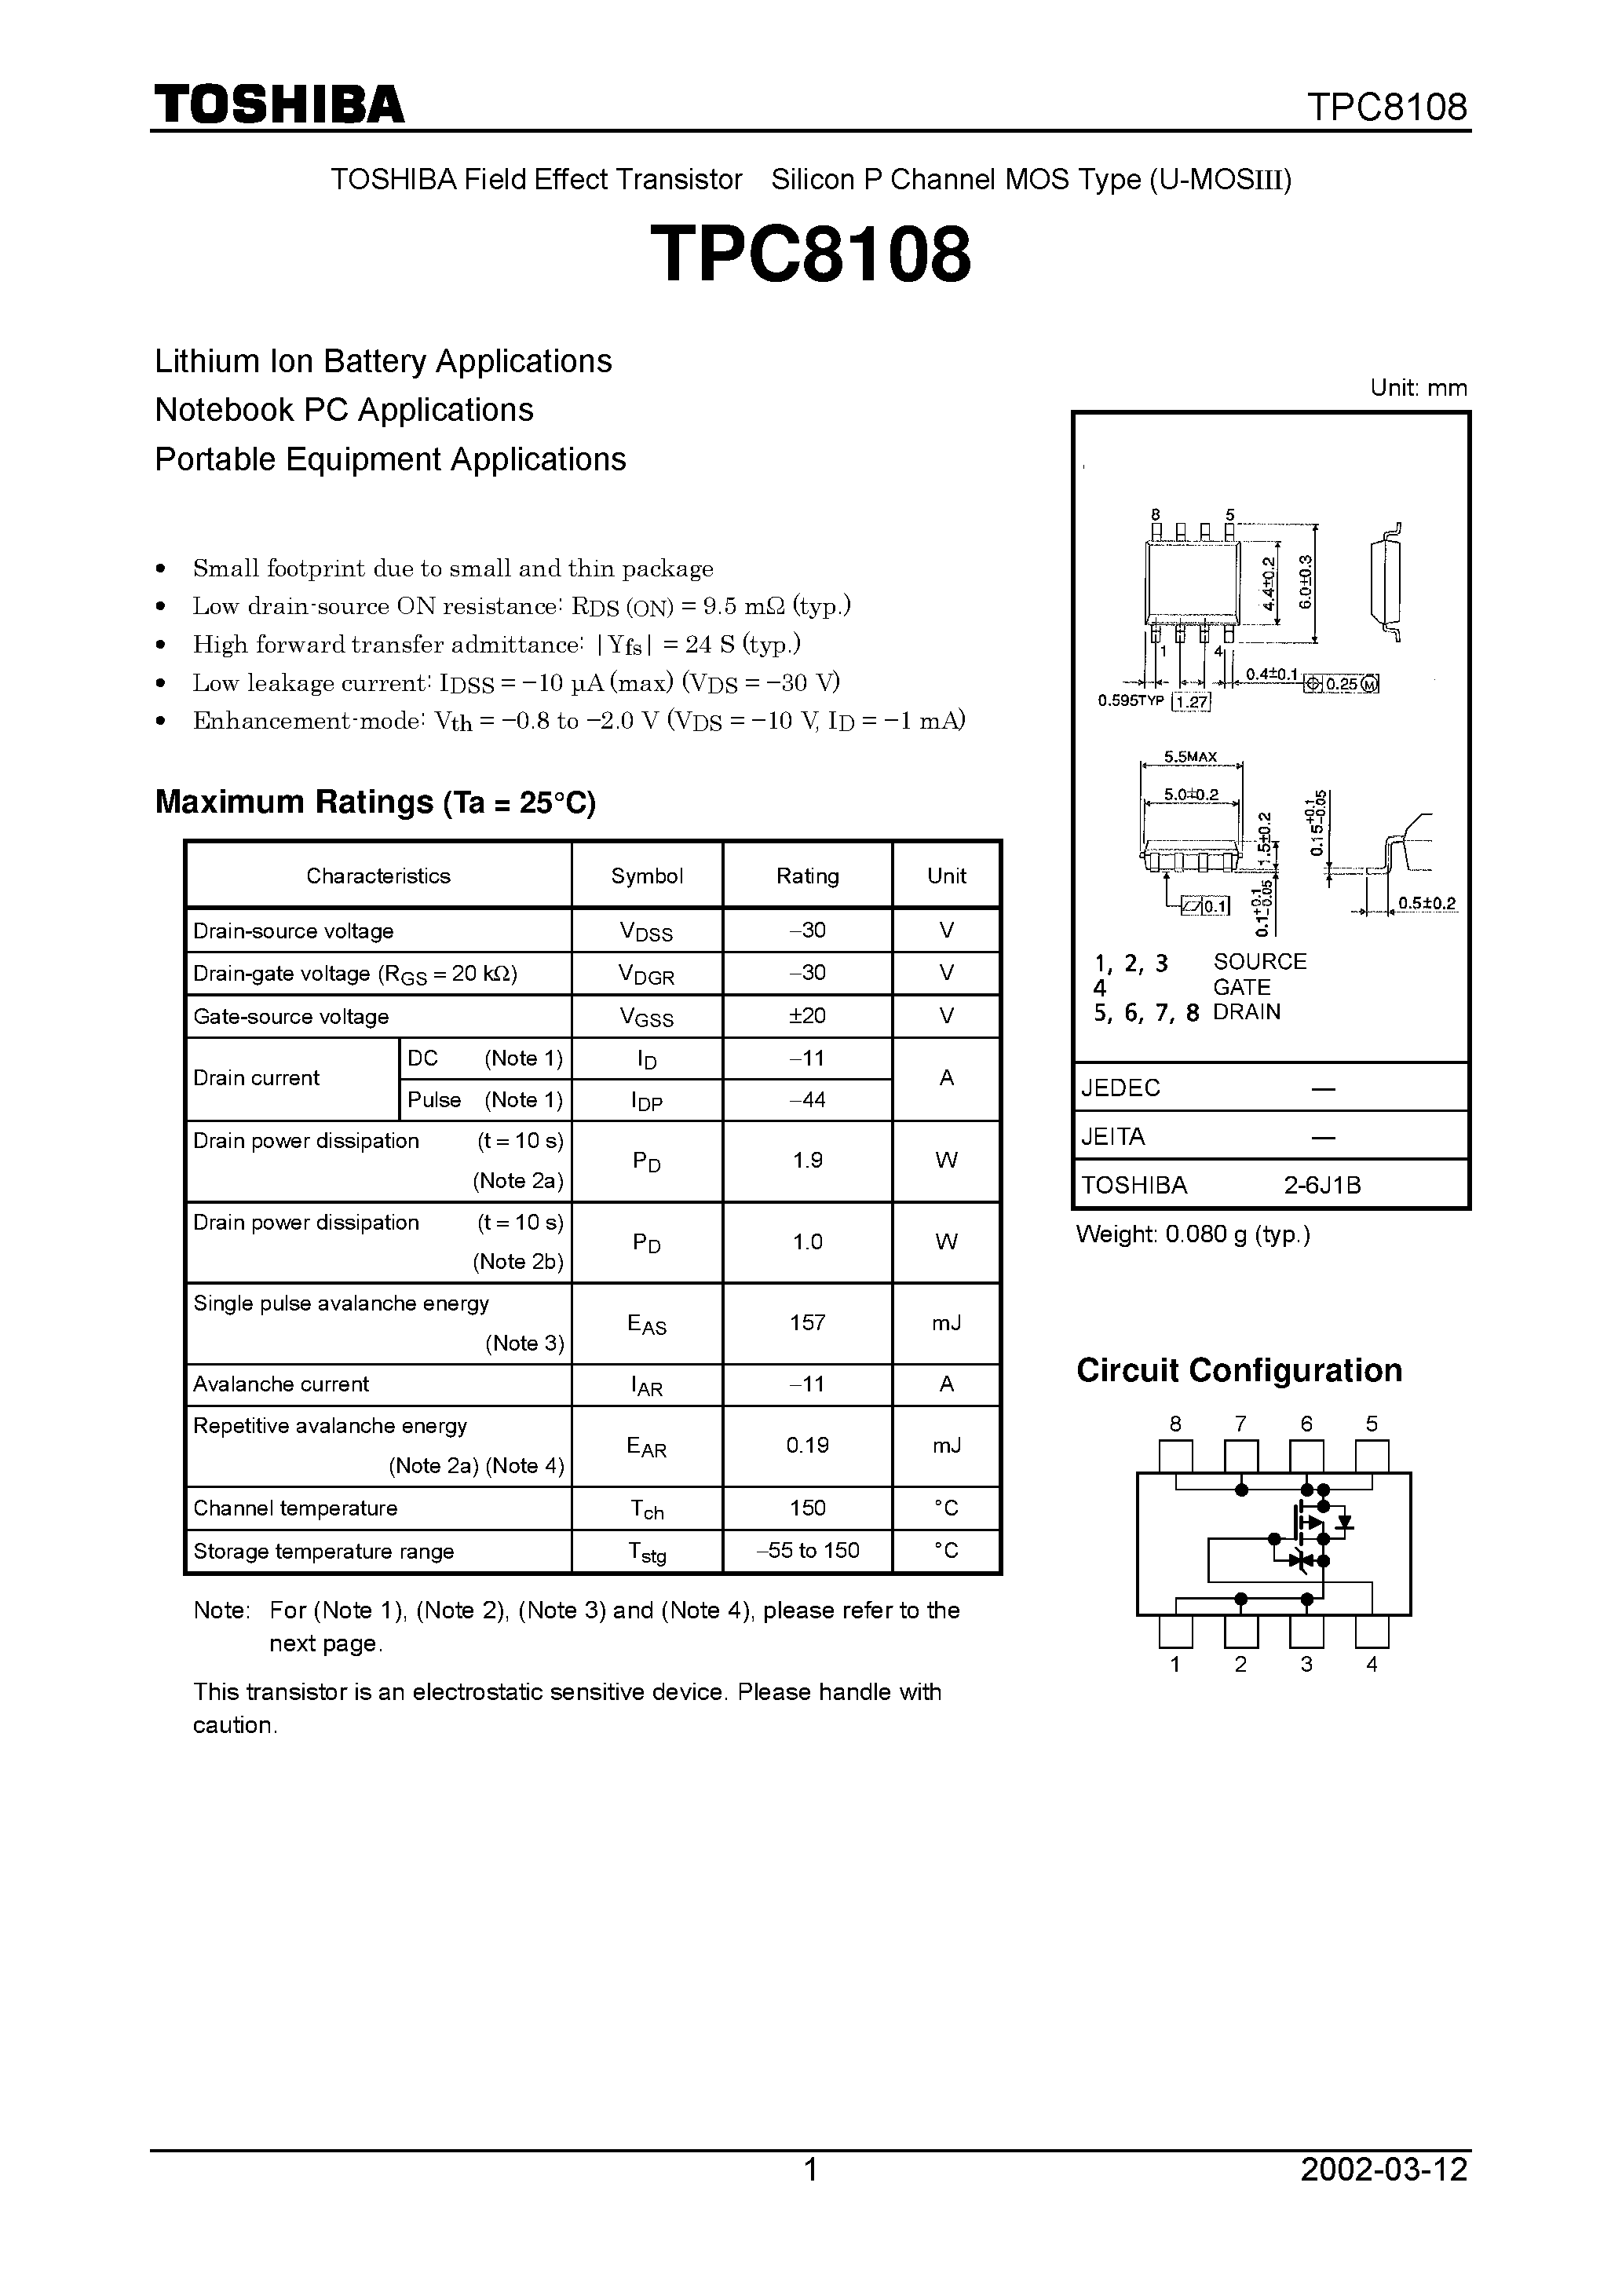 Datasheet TPC8108 - Silicon P Channel MOS Type (U-MOSIII) page 1